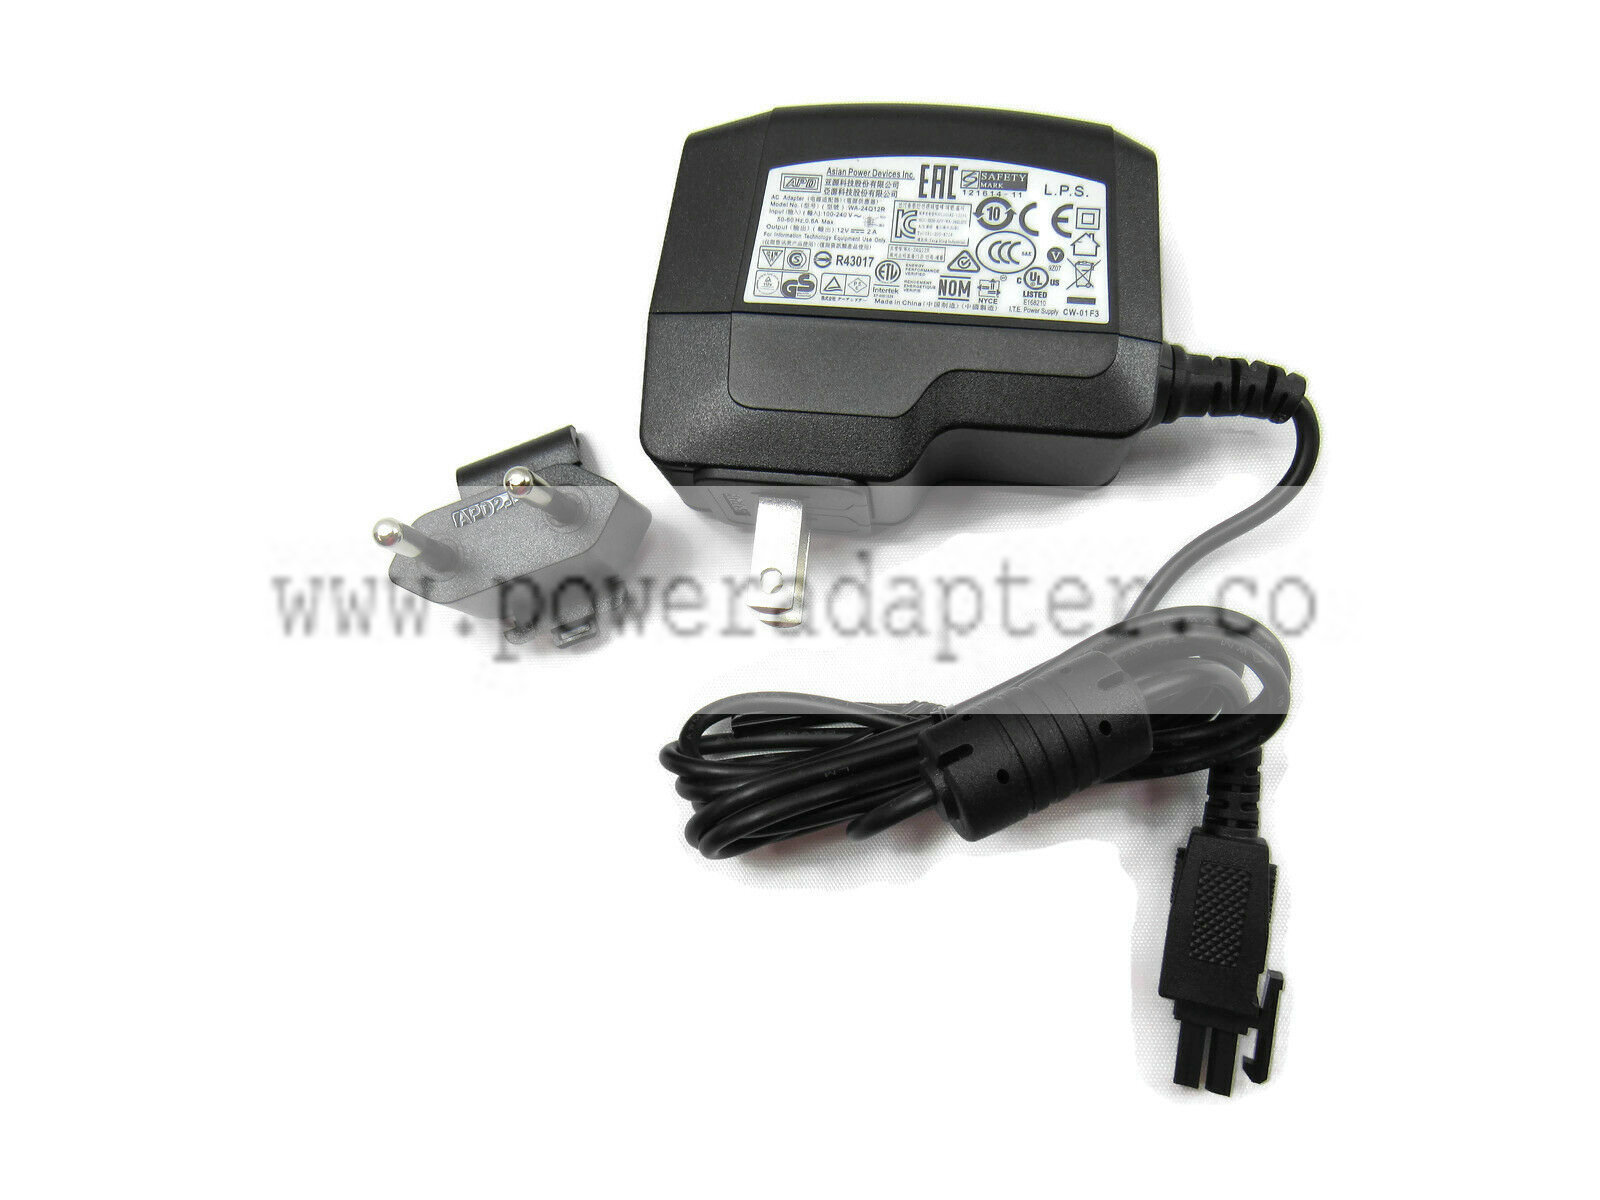 APD Asian Power Devices Model WA-24Q12R AC Adapter With EU Clip New Model: WA-24Q12R Type: AC/DC Adapter Modified Item - Click Image to Close